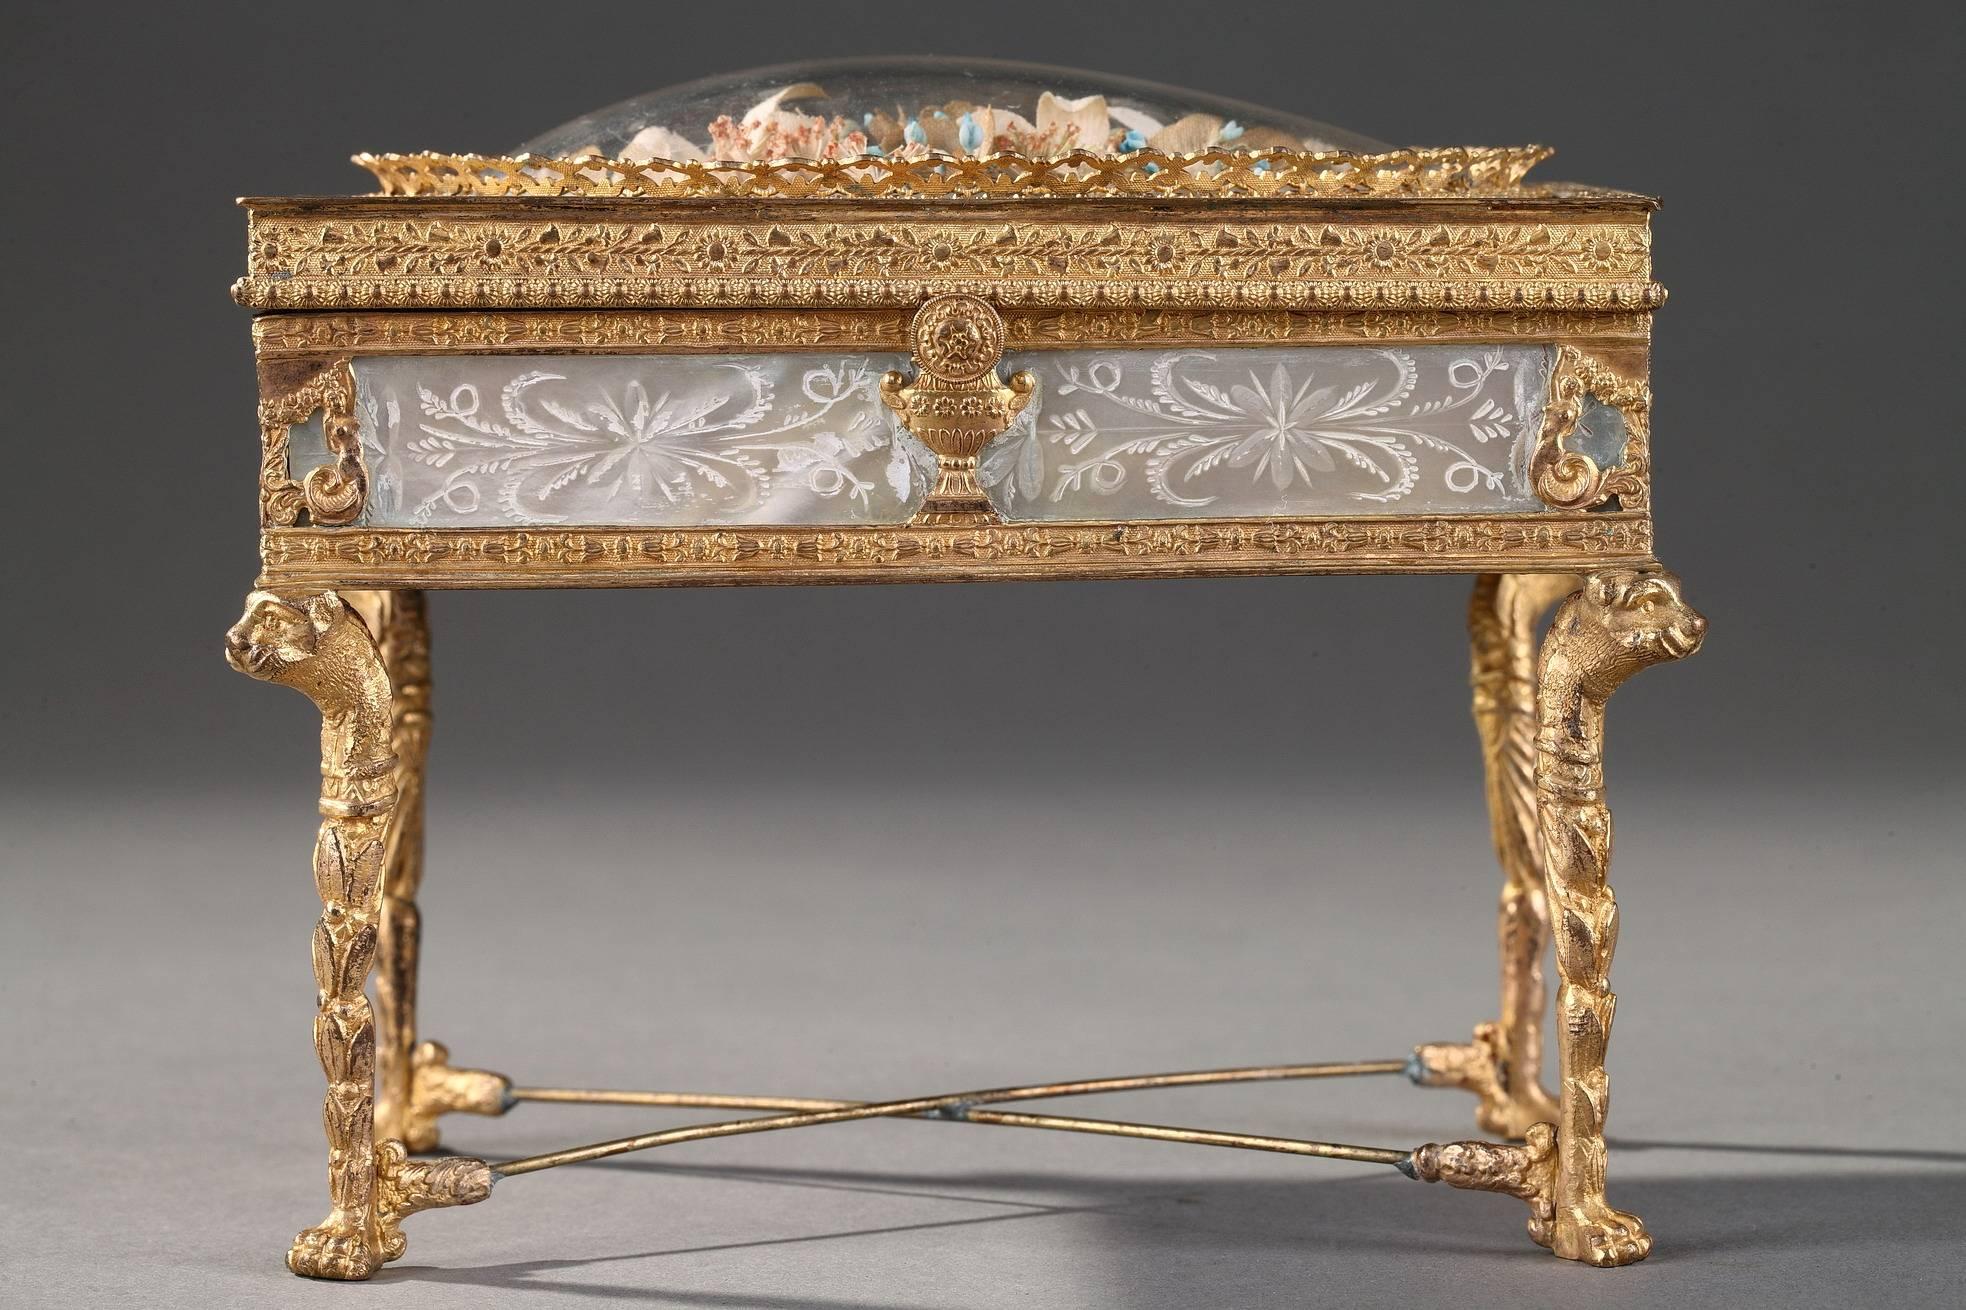 Early 19th century Charles X rectangular console box in mother of pearl and gilt bronze mounts, finely chiseled with branches and flowers. It is set on four foliated feet decorated with lion heads. Friezes with floral pattern and foliage decorate